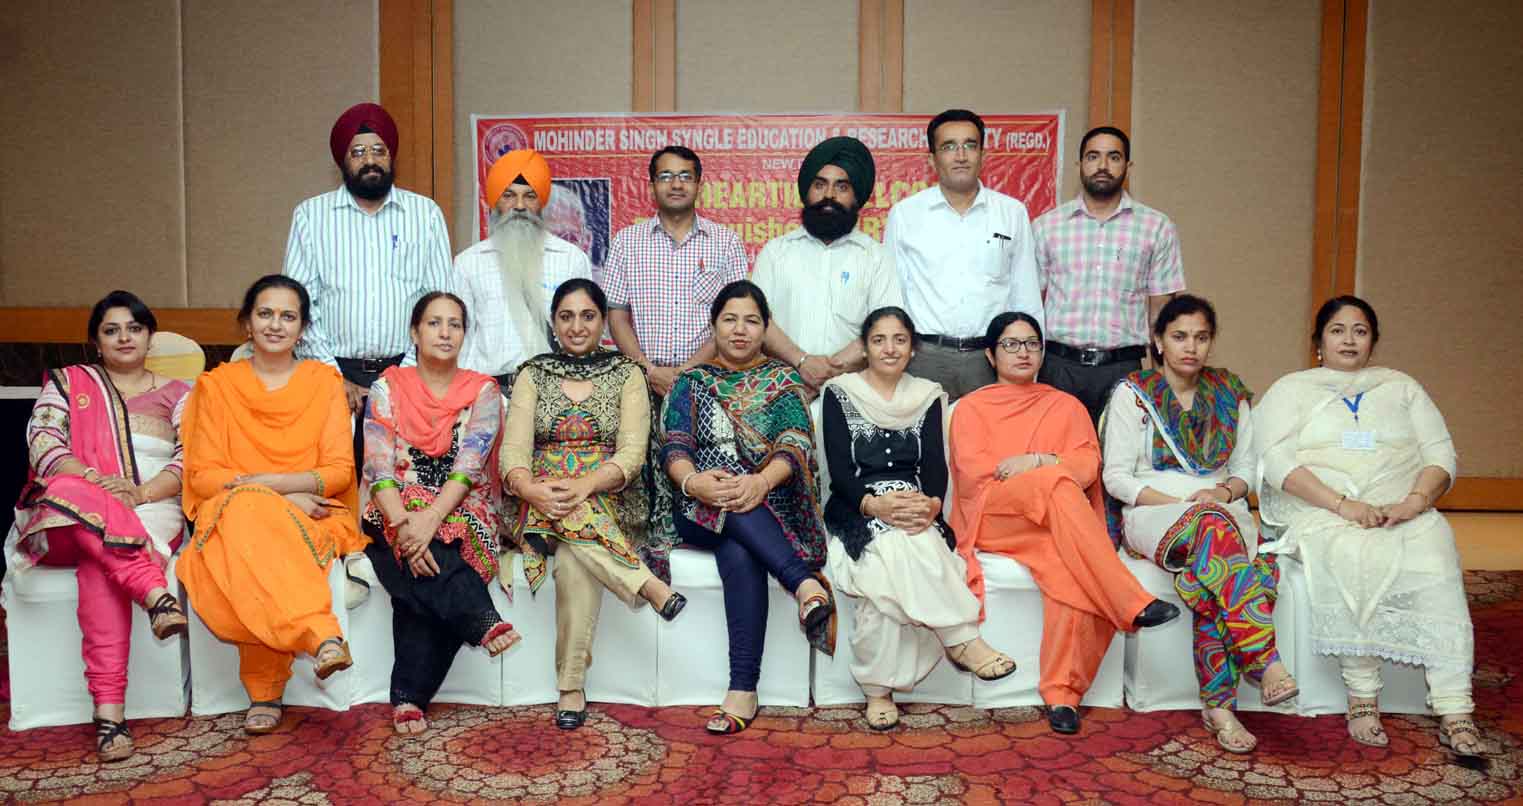 Chandigarh,  May 1st Friday 2015 (Kulbir Singh Kalsi):-   Fifteen teachers, three each in Physics, Chemistry, Mathematics, English & Social Science, from Government higher secondary and high schools of Punjab, have been selected for the Malti Gyan Peeth Puraskar 2015 for promoting quality teaching  and encouraging education of girl child in Punjab. Recognised by the Punjab Government, Malti Gyan Peeth Puraskar is awarded to the best teachers every year since 2013, and comprises of Rs One Lakh, a Certificate of Excellence, and a Robe of Honour. The Award has been instituted by Mohinder  Singh Syngle Education & Research Society, promoted byfirst generation industrialist, educationist and philanthropist,  Mr. Manoj Singhal, CMD of MM Auto Industries Ltd.and group companies and his mother, a renowned educationist, Smt. Malti Mohinder Singh Syngle, in the year 2003. Malti Gyan Peeth Puraskar has been  instituted to honour Smt. Malti Mohinder Singh Syngle,  who tirelessly worked for over four decades, educating the girl child. She retired  from Punjab Govt. Educational services as Principal, in the year 1980. Even after retirement, she, in her 94th year now , continues her efforts unabated   for spread of education, especially for under privileged students in the rural sector. She was one of the first woman in Punjab  to achieve Bachelor of Teaching in the year 1951, having done her post graduation in 1948.                                                    Mr. Manoj Singhal, chairman of the jury, informed that over  100 nominations were received from all over Punjab after shortlisting by the Directorate of Public Instructions (Schools), and today, a high profile jury conducted written test and personal interviews at Hotel Taj since morning to declare the winners. The jury chaired by Mr Manoj Singhal included Dr. Nand Kishore Garg, Chancellor and Dr. S.P. Bansal, Vice Chancellor of Maharaja Agrasen University;  former Chief Election Commissioner of IndiaMr. B.B. T